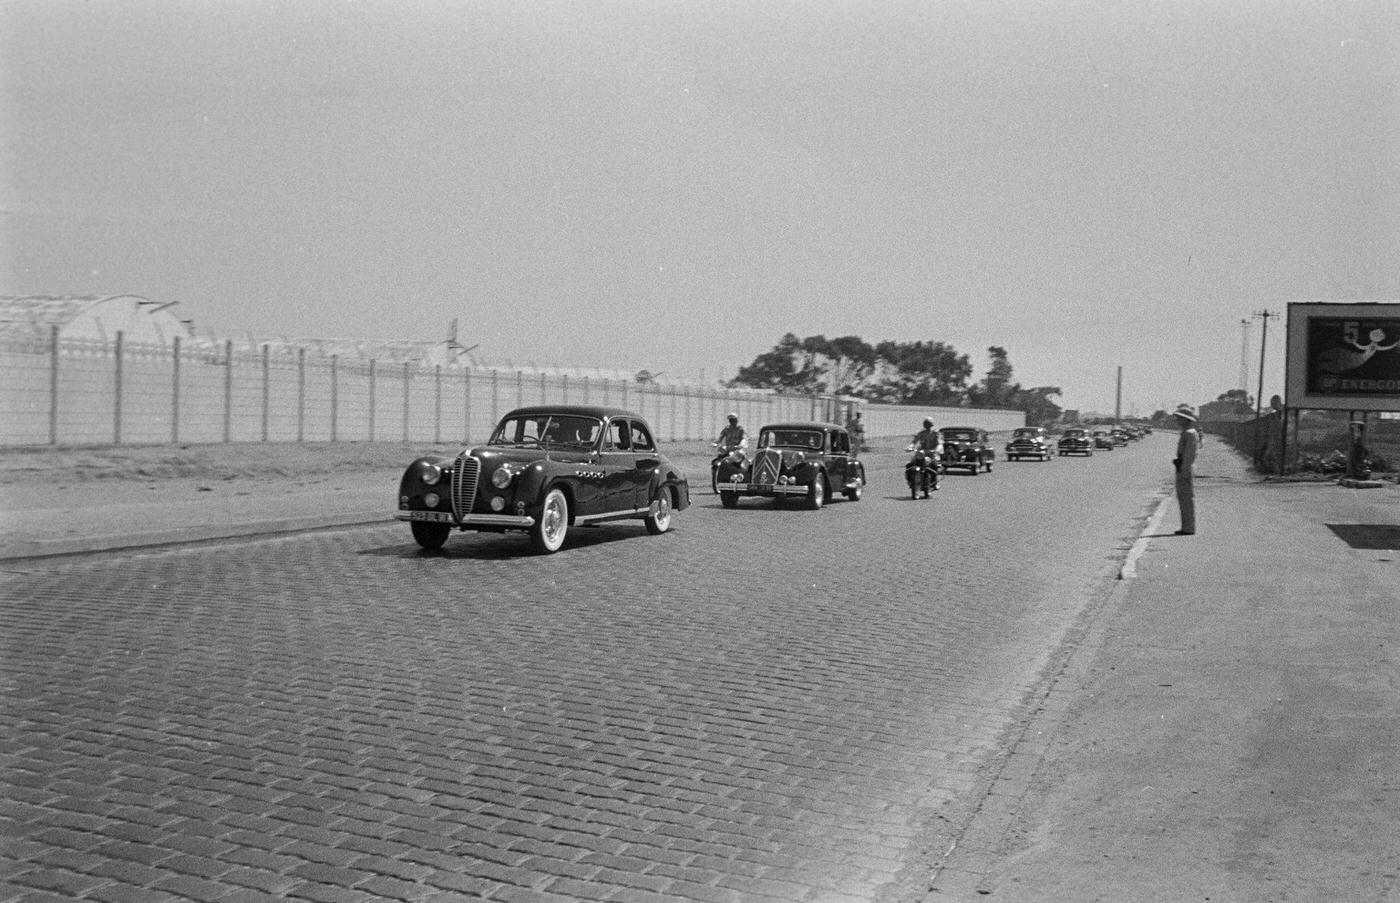 Official visit of Guy Mollet to Algeria, September 8, 1956, with a convoy of official cars including a Citroën Traction Avant.